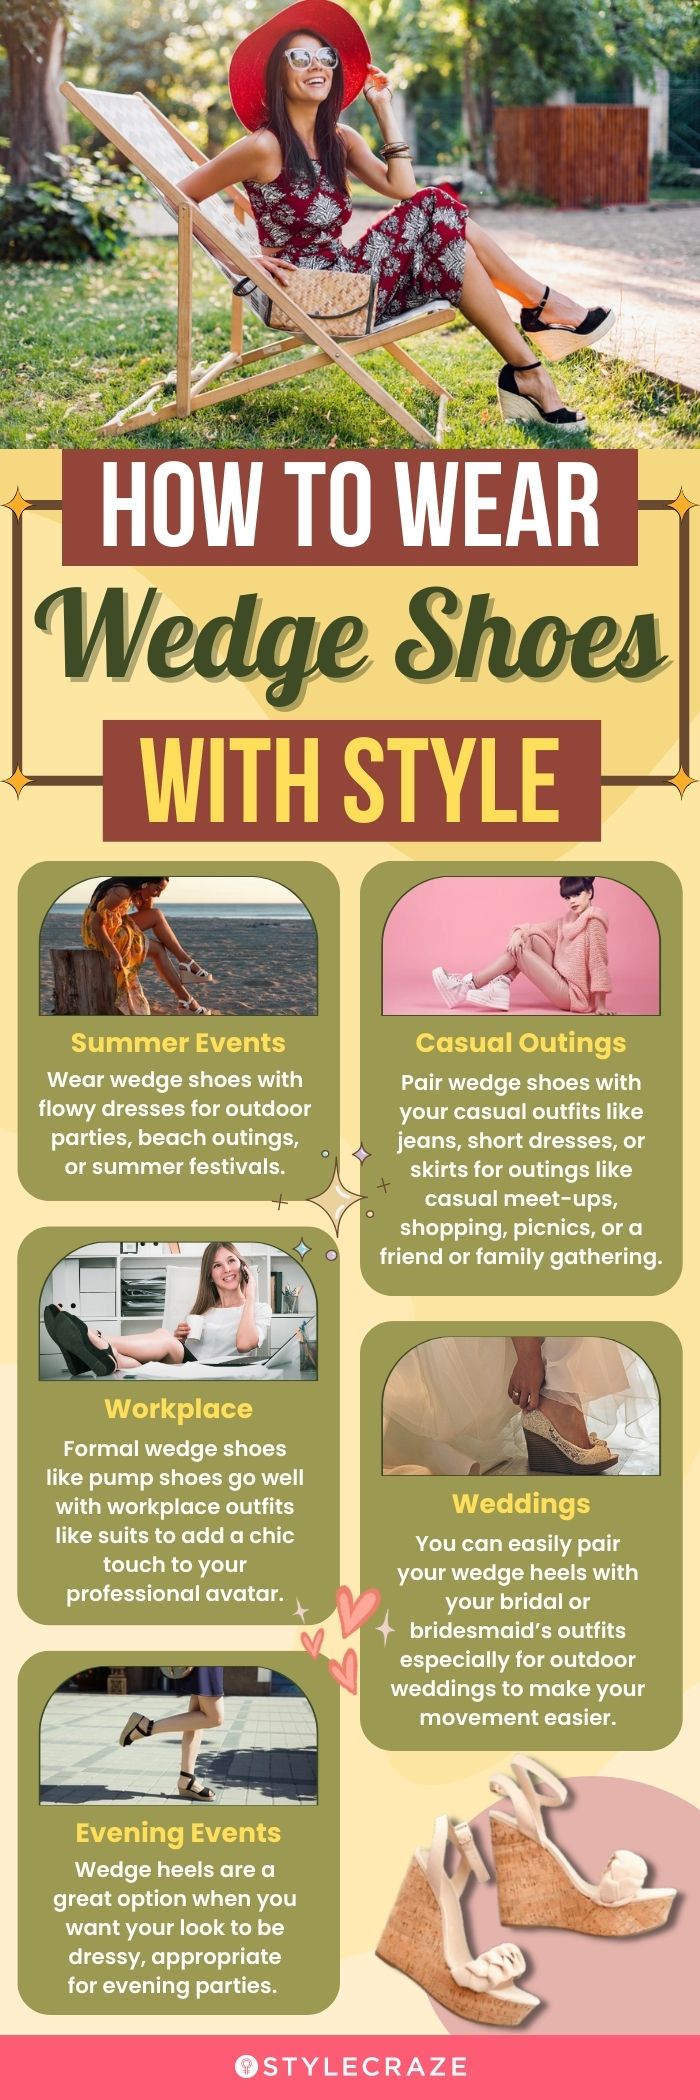 How To Wear Wedge Shoes With Style (infographic)